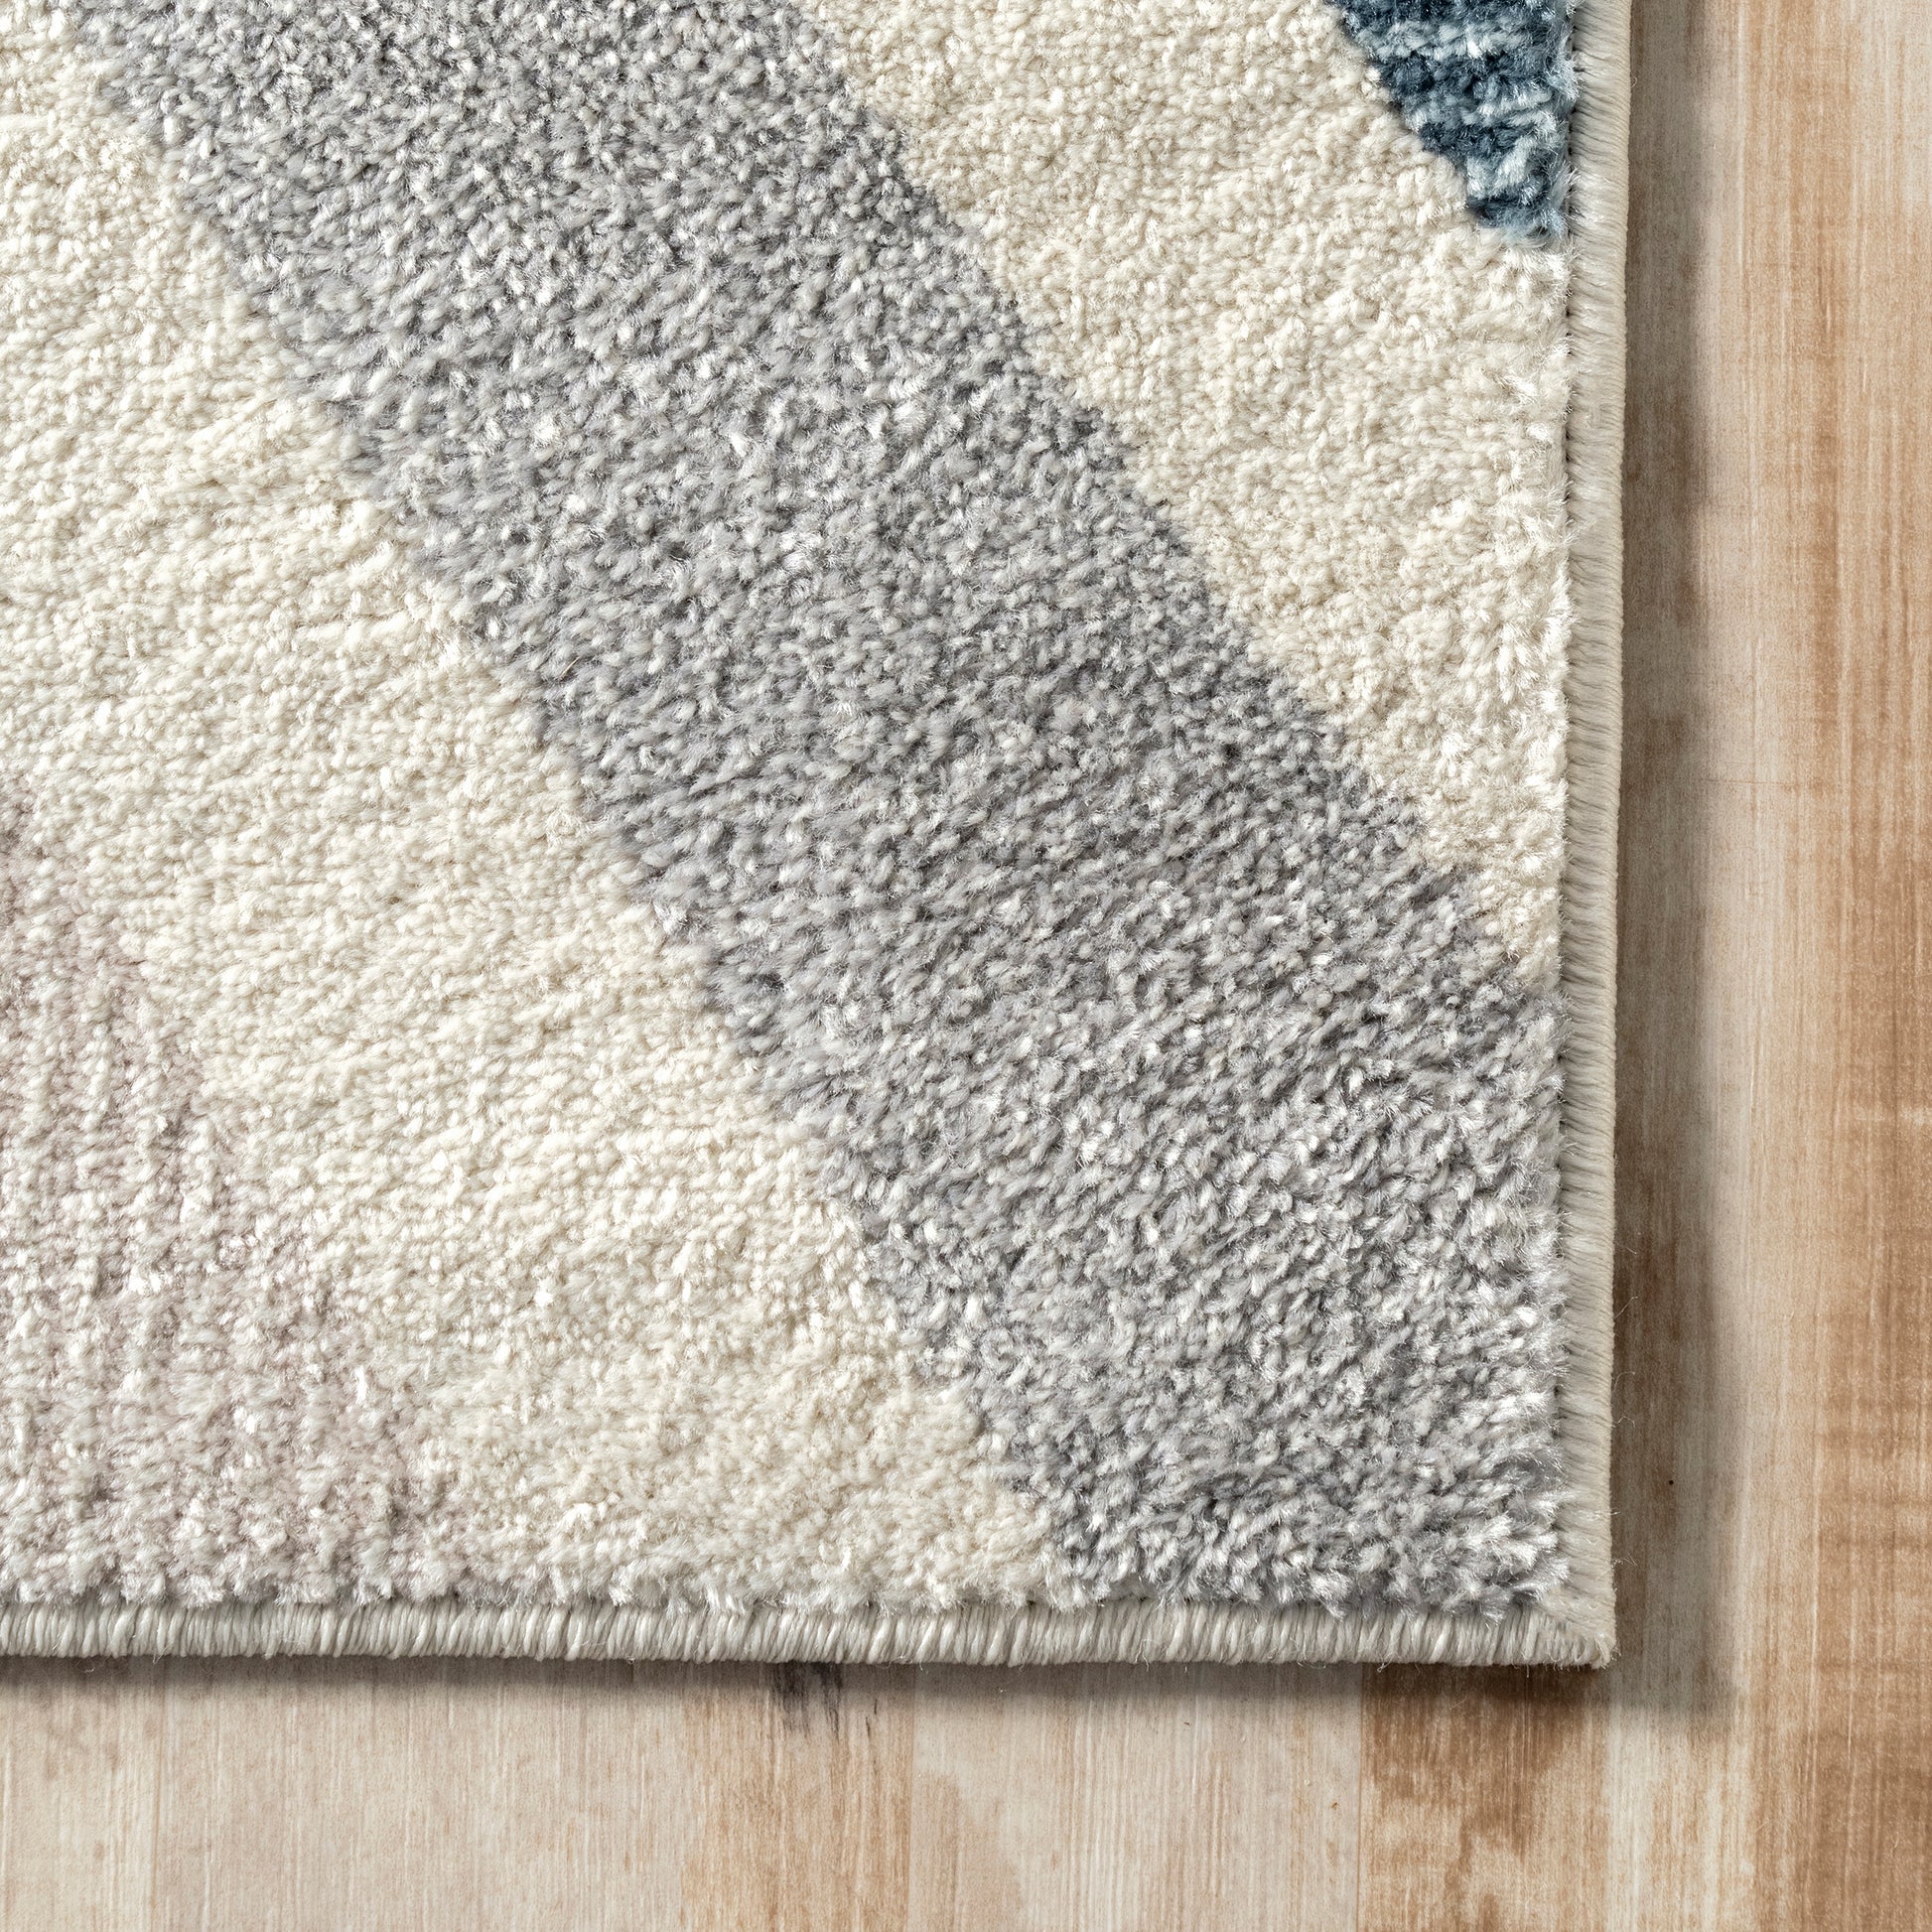 Nuloom Neveah Chevron Nne1922A Beige Area Rug